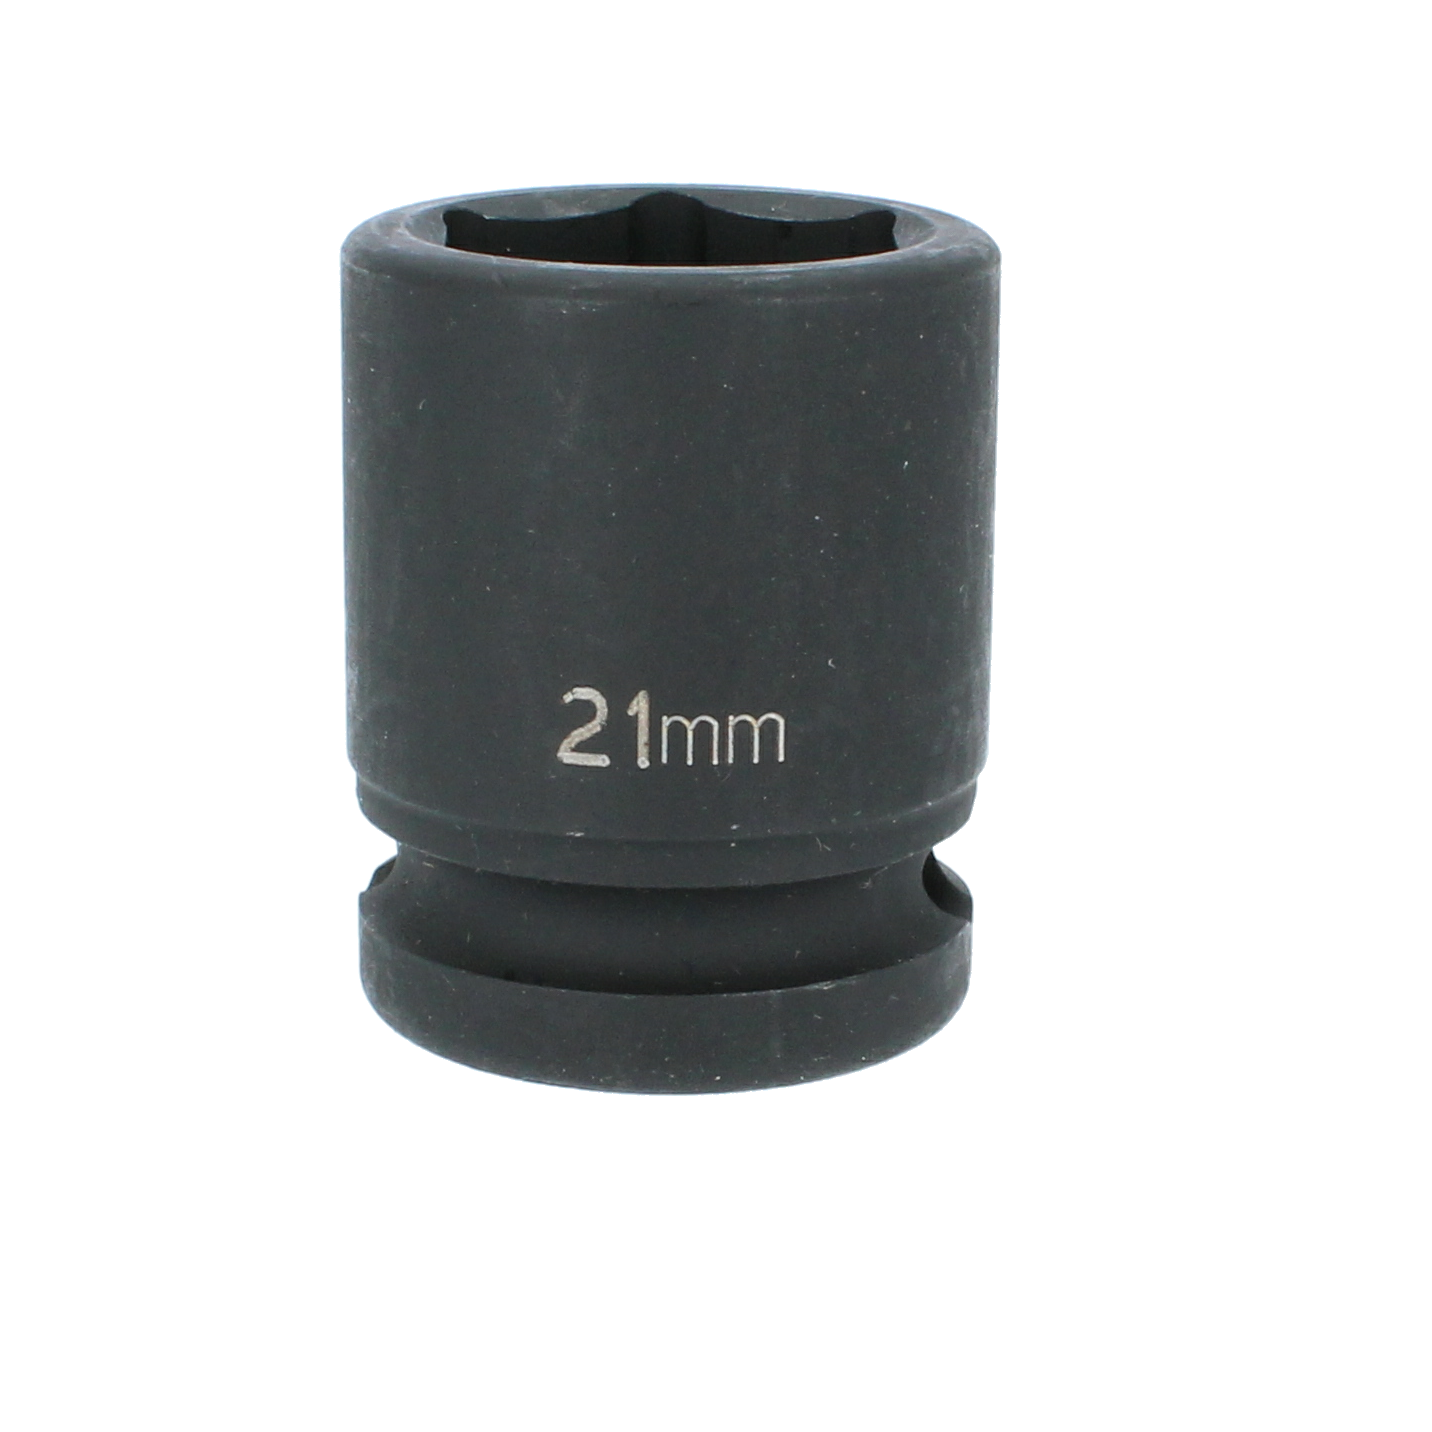 krafttop magnettop 21mm x 1/2"